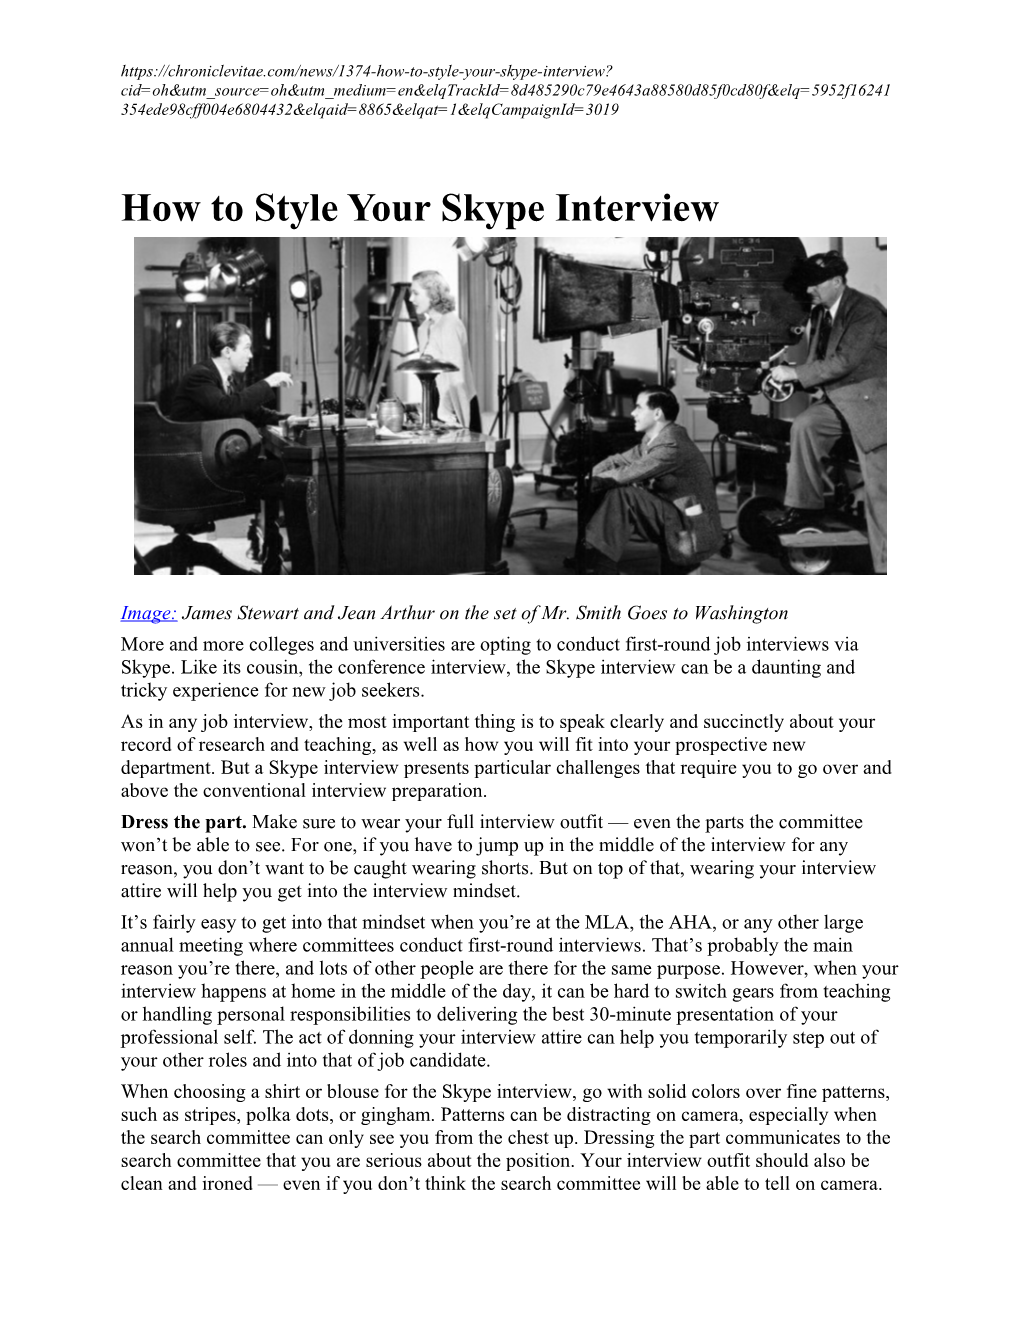 How to Style Your Skype Interview